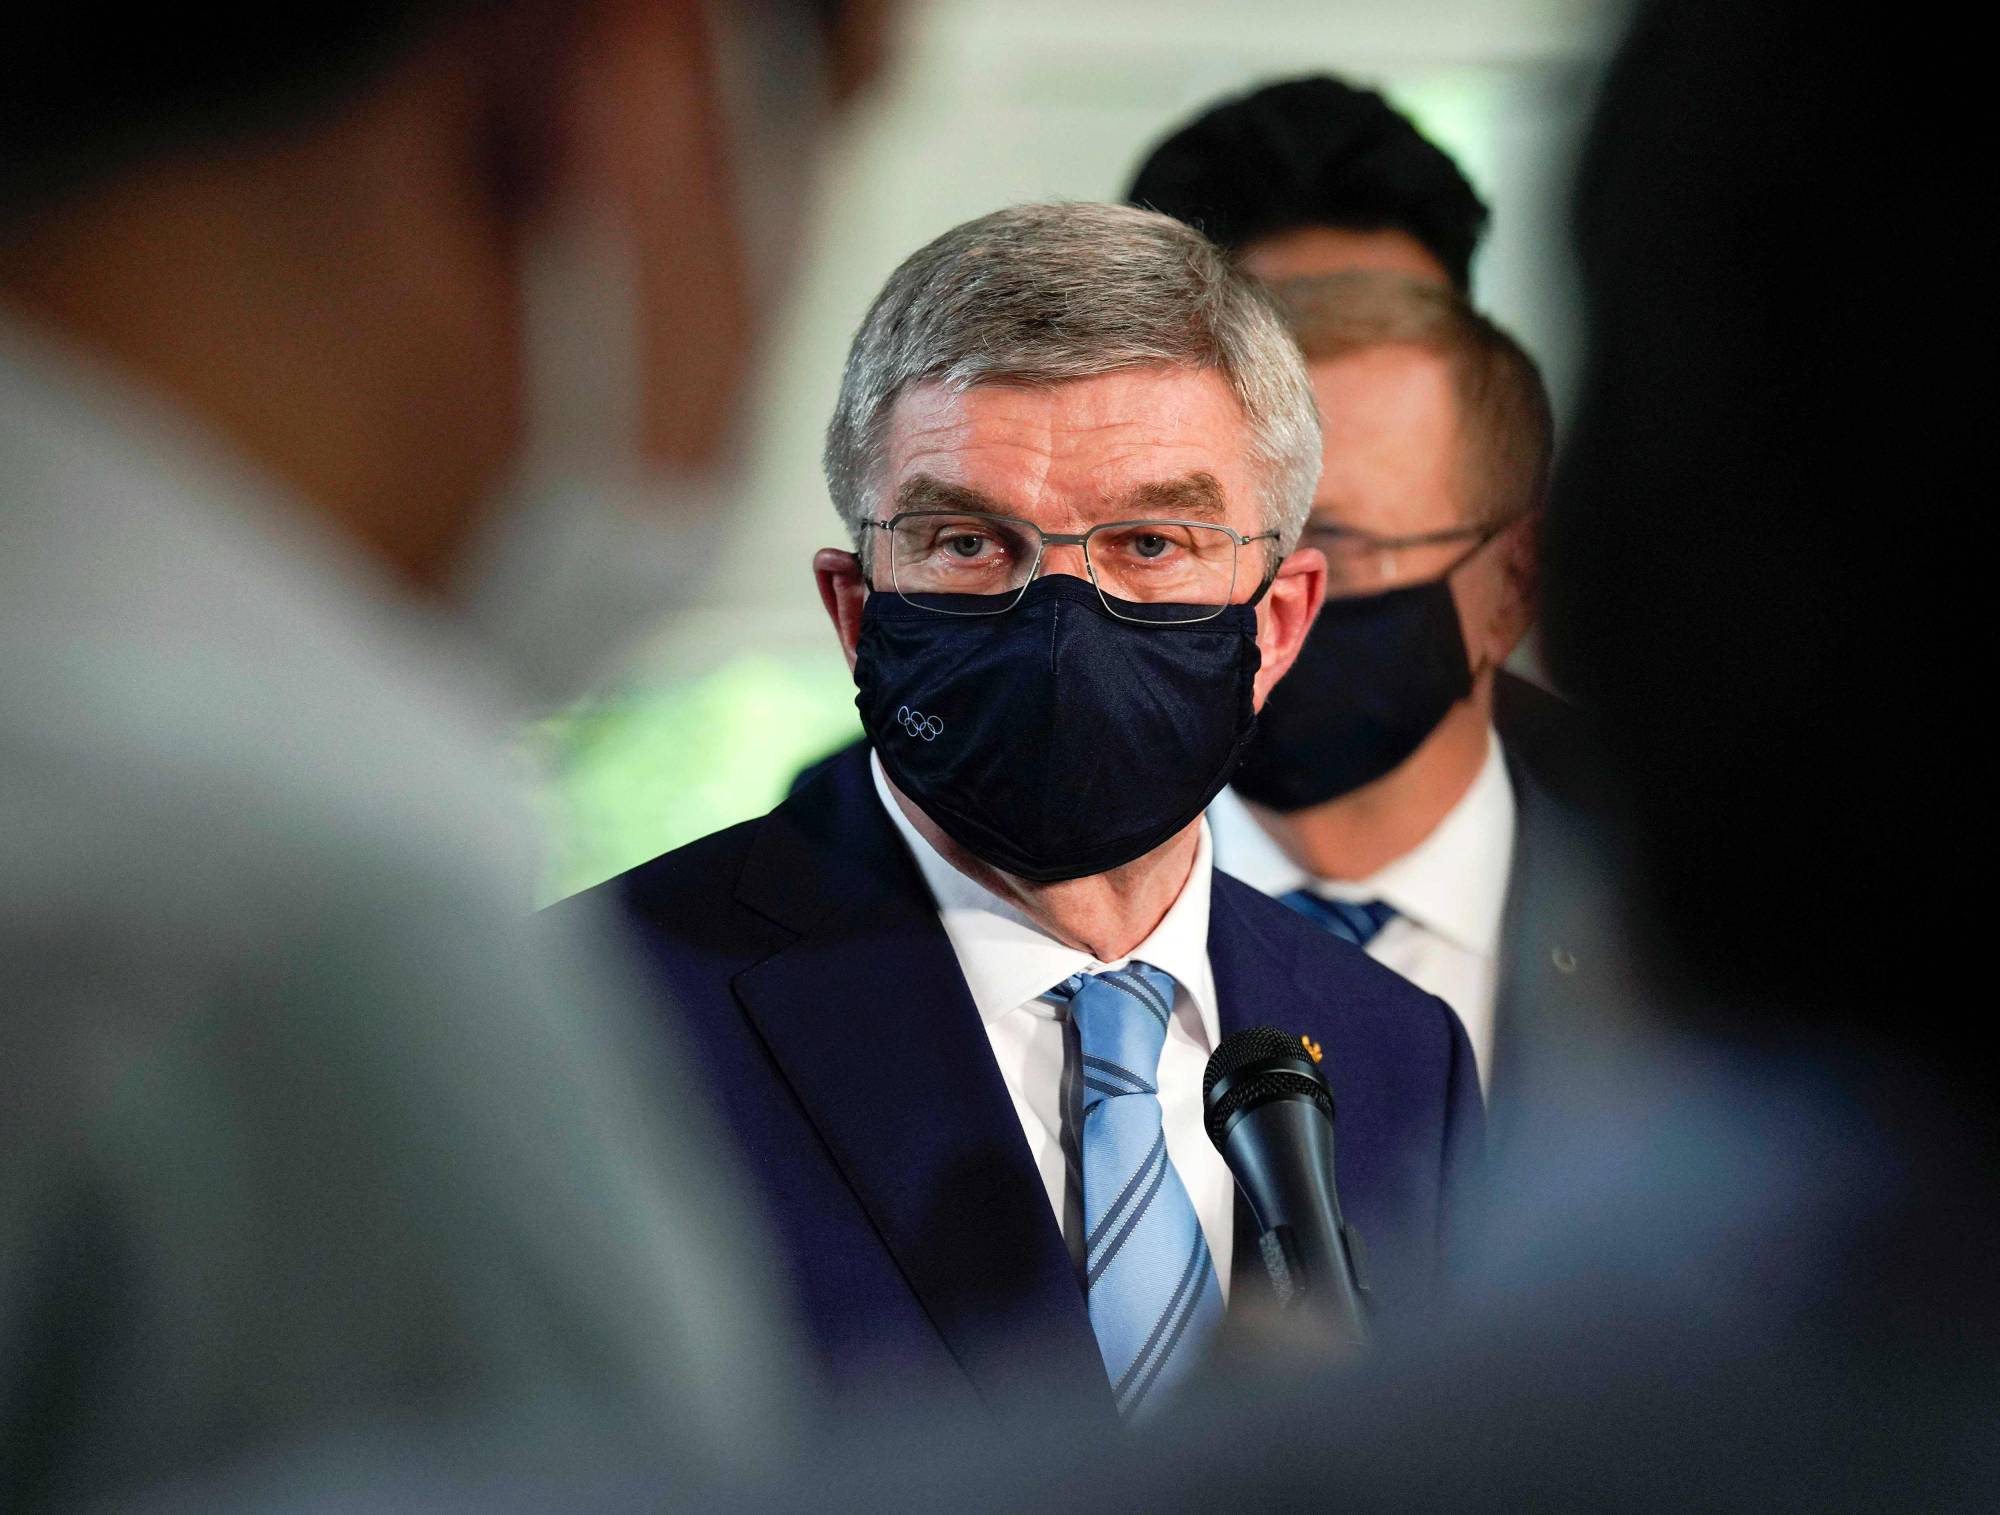 International Olympic Committee President Thomas Bach speaks to the media after meeting Prime Minister Yoshihide Suga in Tokyo on Wednesday. | POOL / VIA AFP